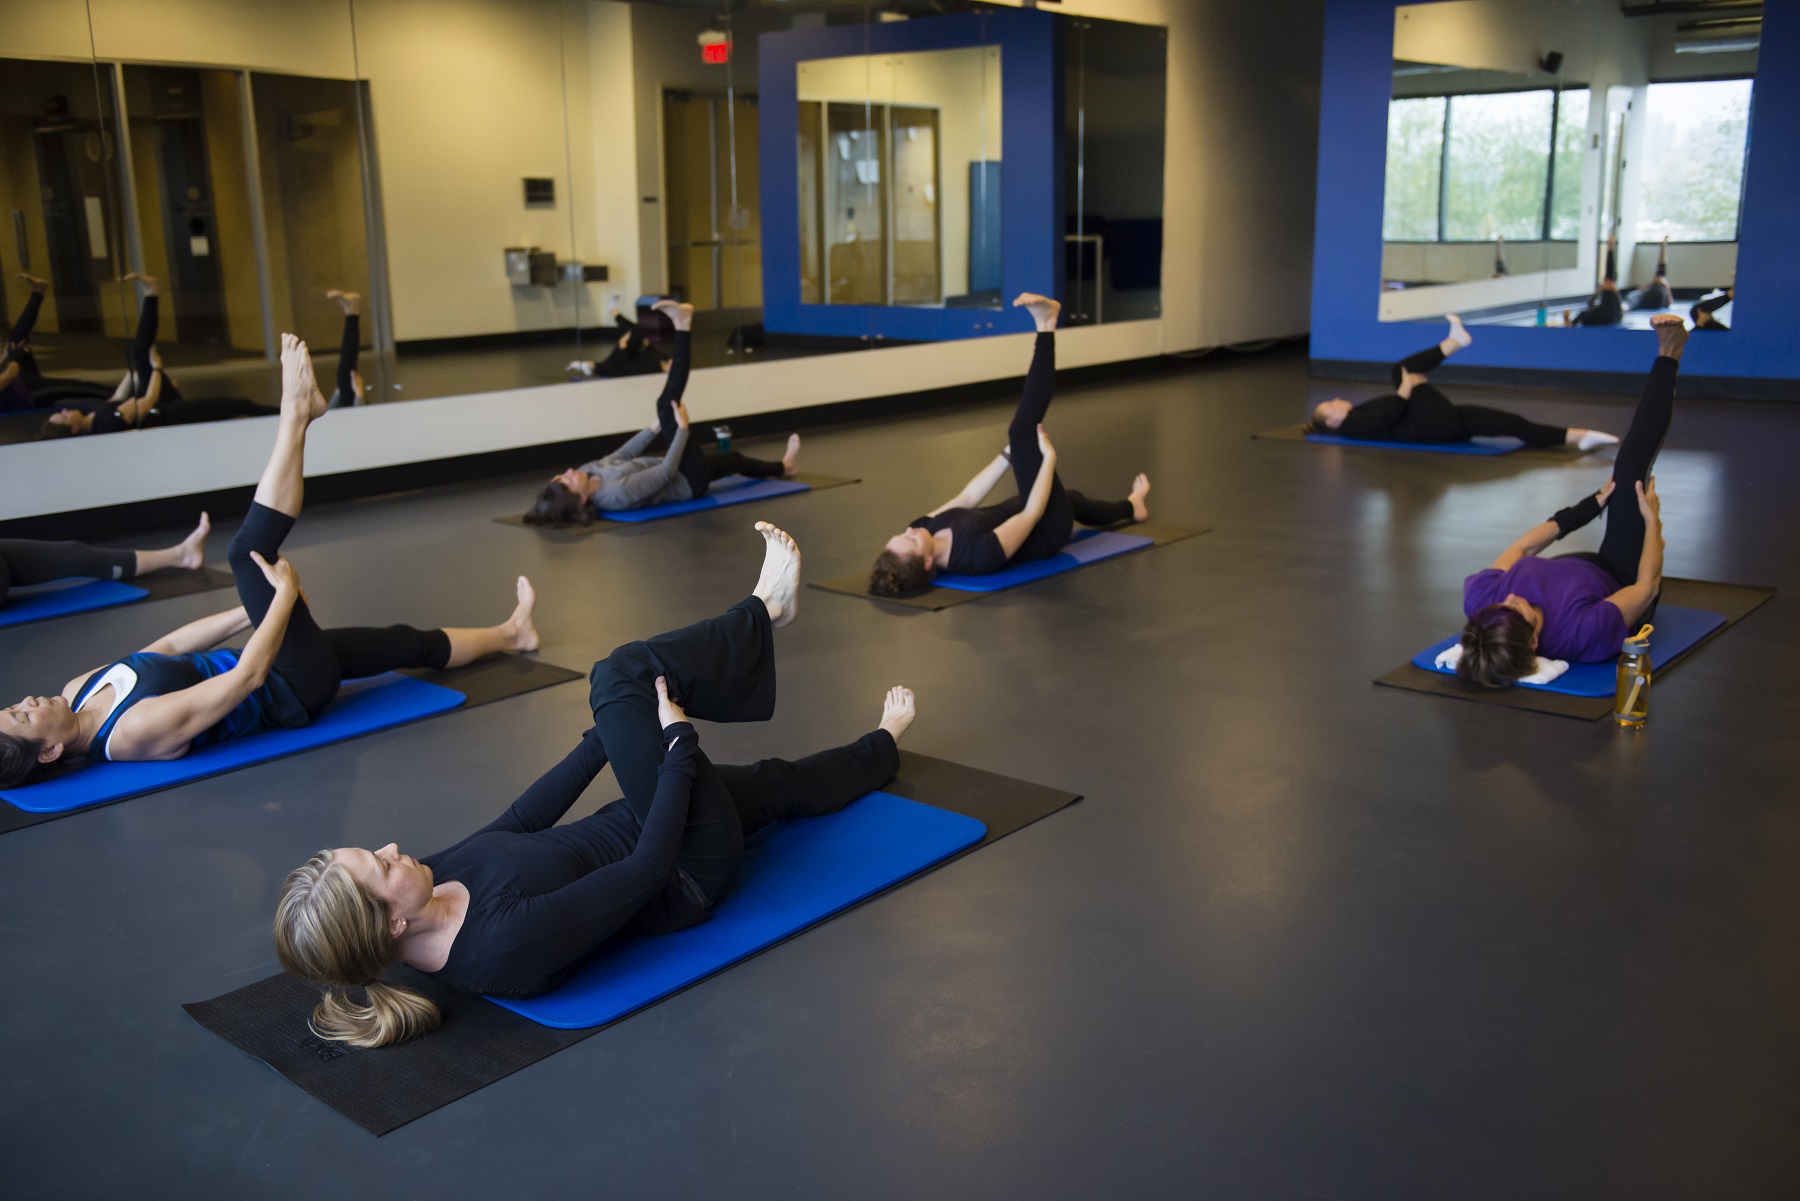 Pilates participants on mats performing floor exercises.